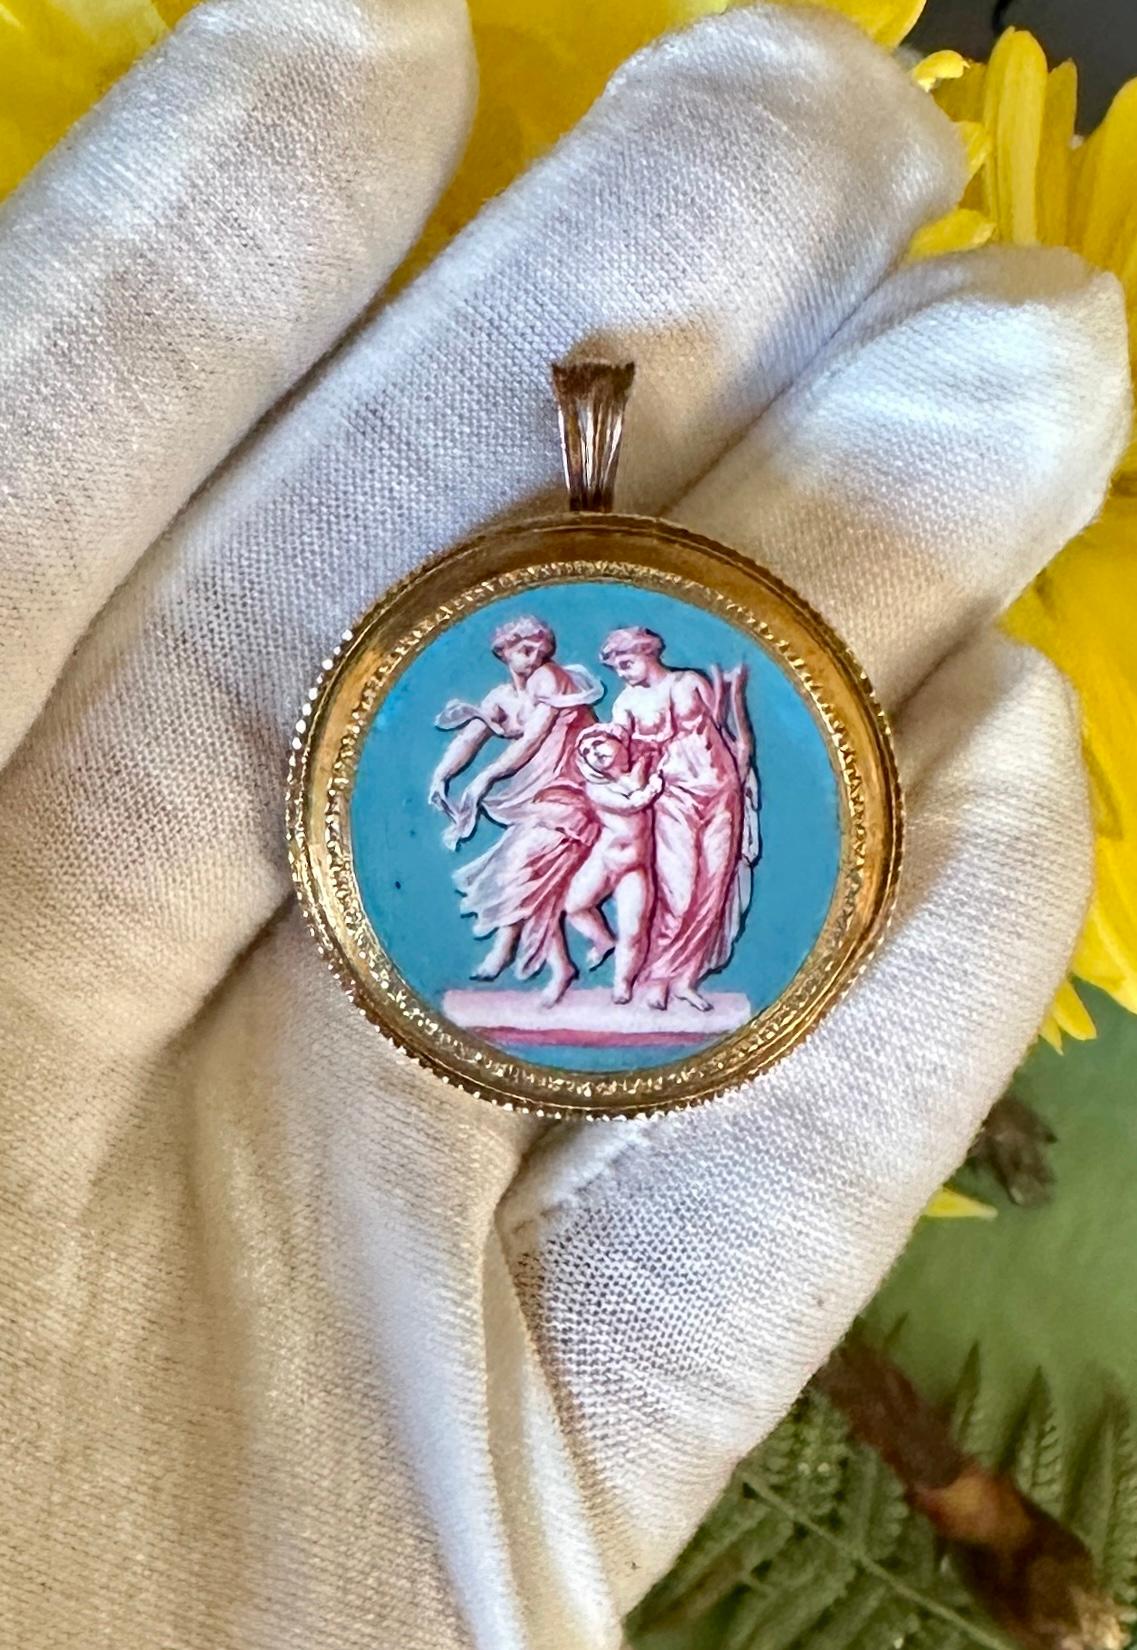 This is an extraordinary antique Enamel 18 Karat Gold Pendant or Brooch with a stunning hand painted image of two Goddess figures with a Cherub or Angel.  The neo-classical pendant is in the Etruscan Revival style with exquisite gold work and an